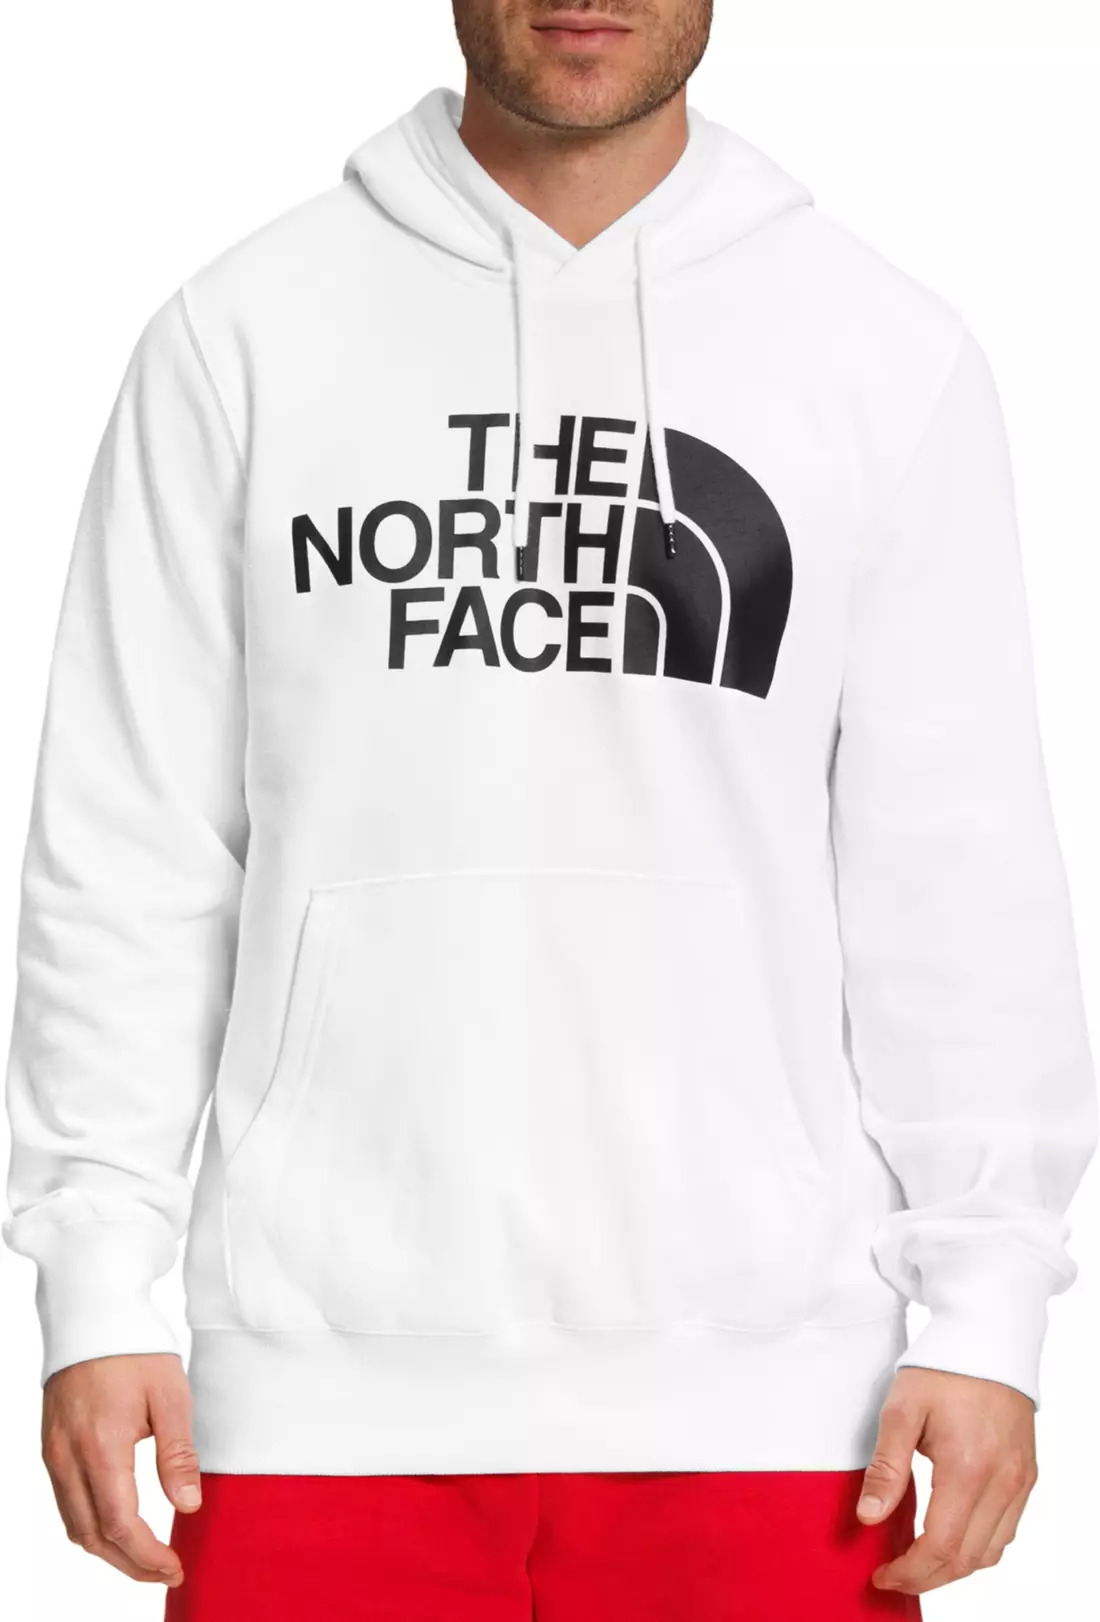 The North Face Men's Jumbo or Half Dome Hoodies (Various Colors, Size S ...